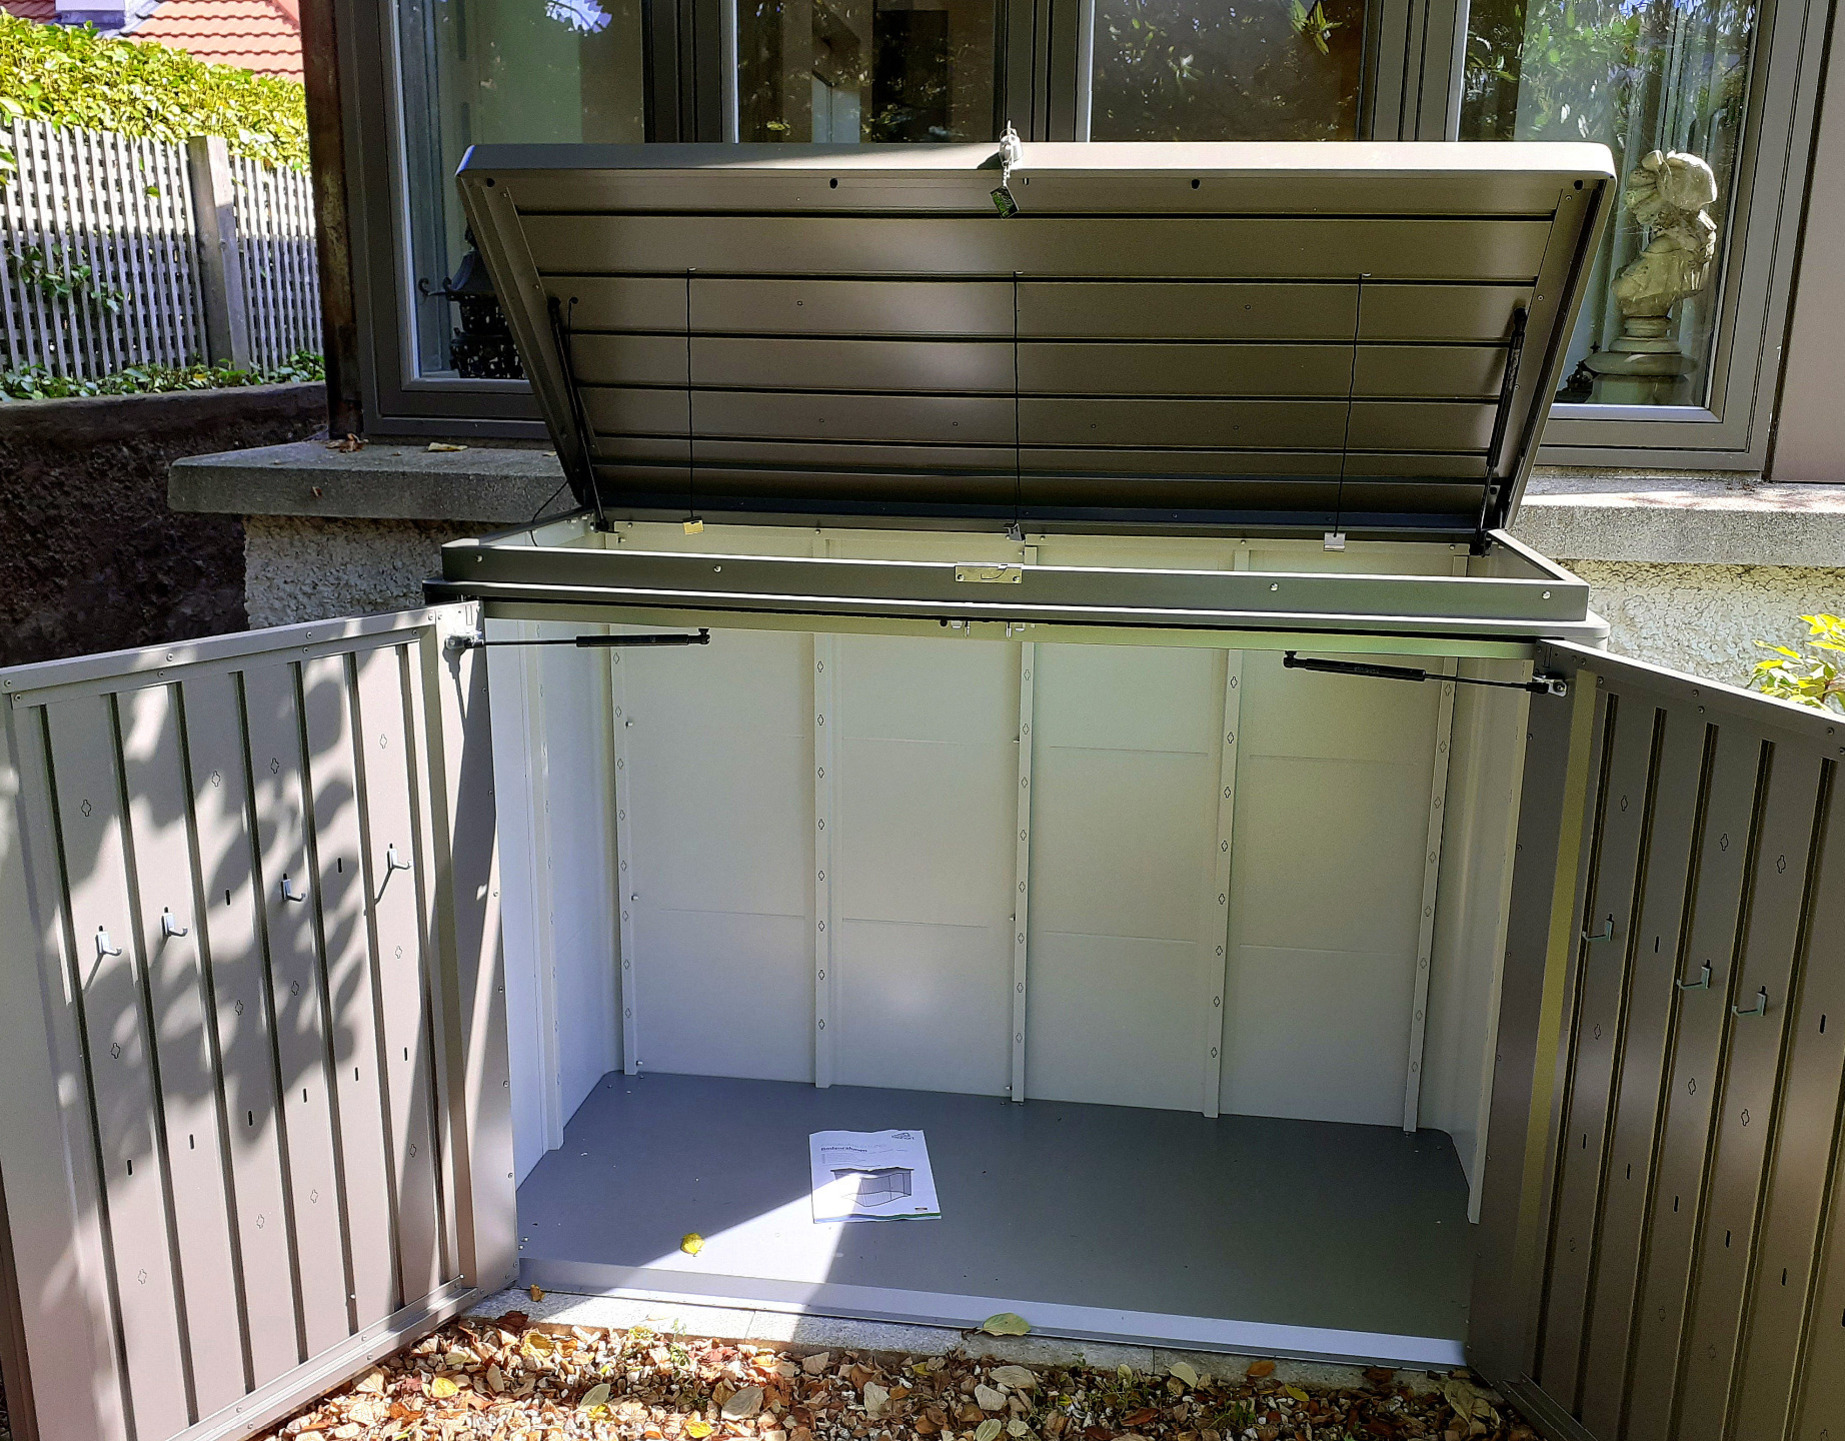 Biohort HighBoard 160 Garden Storage Unit | Supplied + Fitted in Glenageary, Co Dublin | Competitive Prices with FREE installation from Owen Chubb Landscapes Ltd, Tel 087-2306128